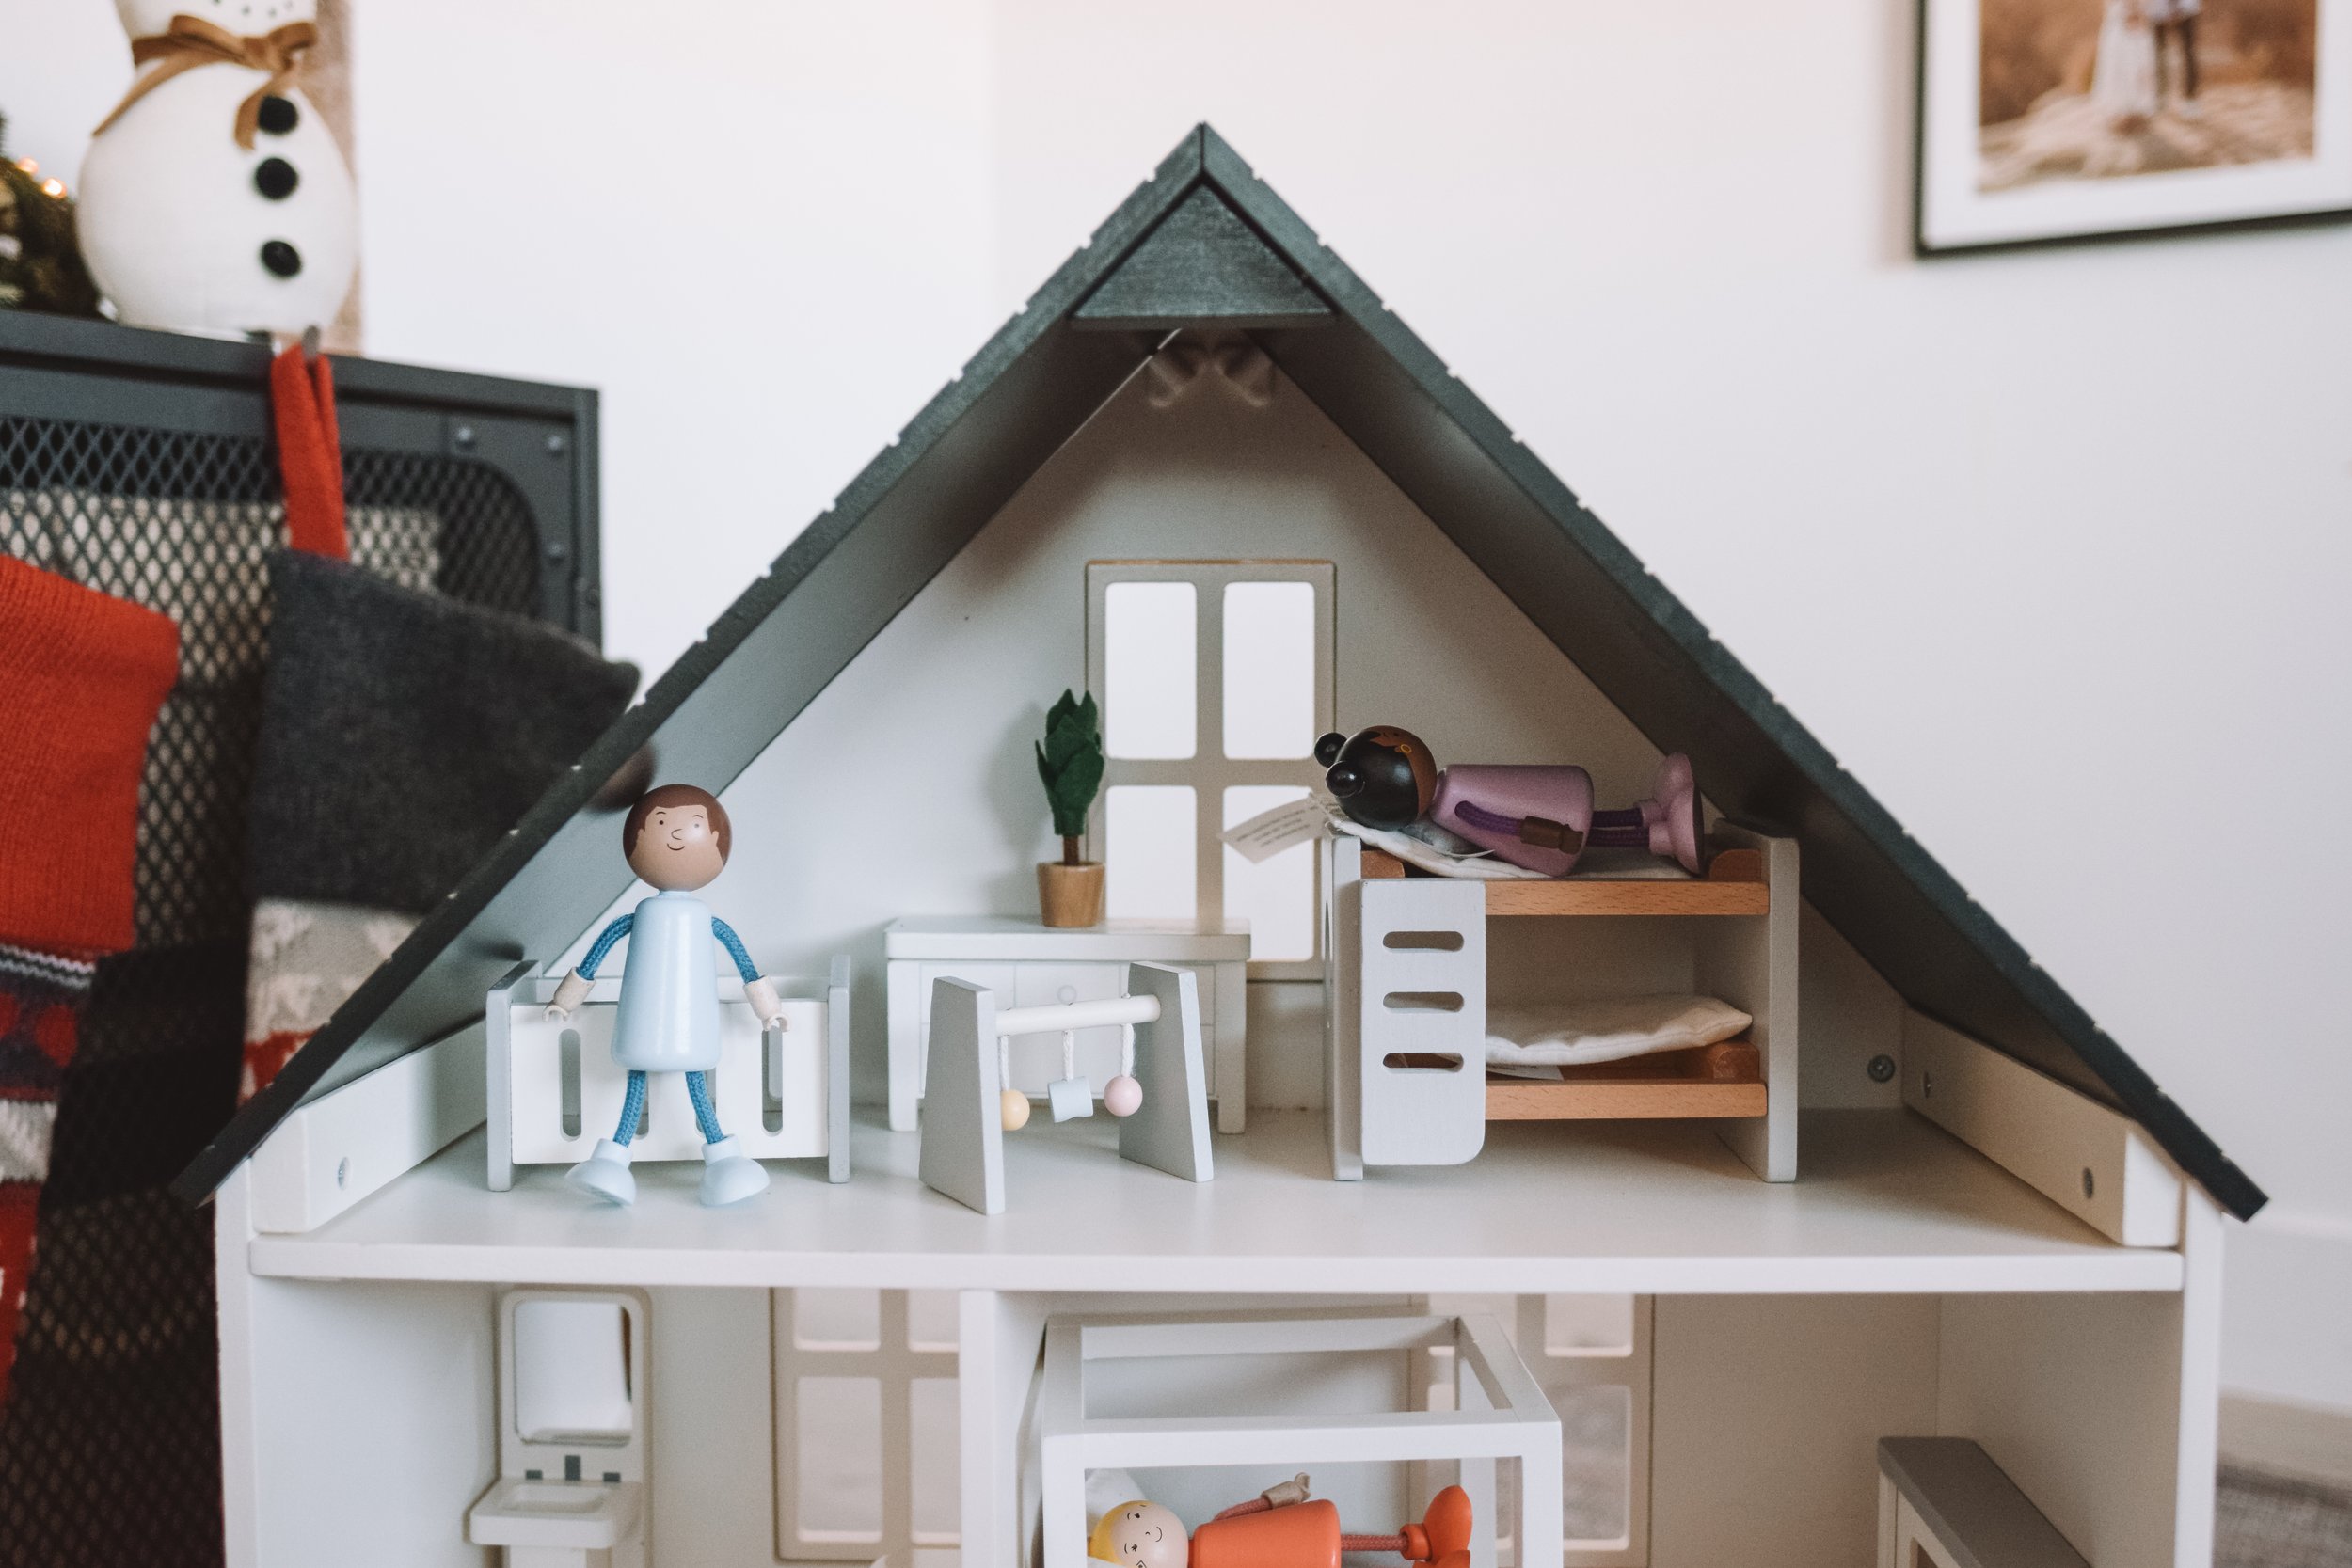 Kids Holiday Gift Ideas - Wooden Dollhouse